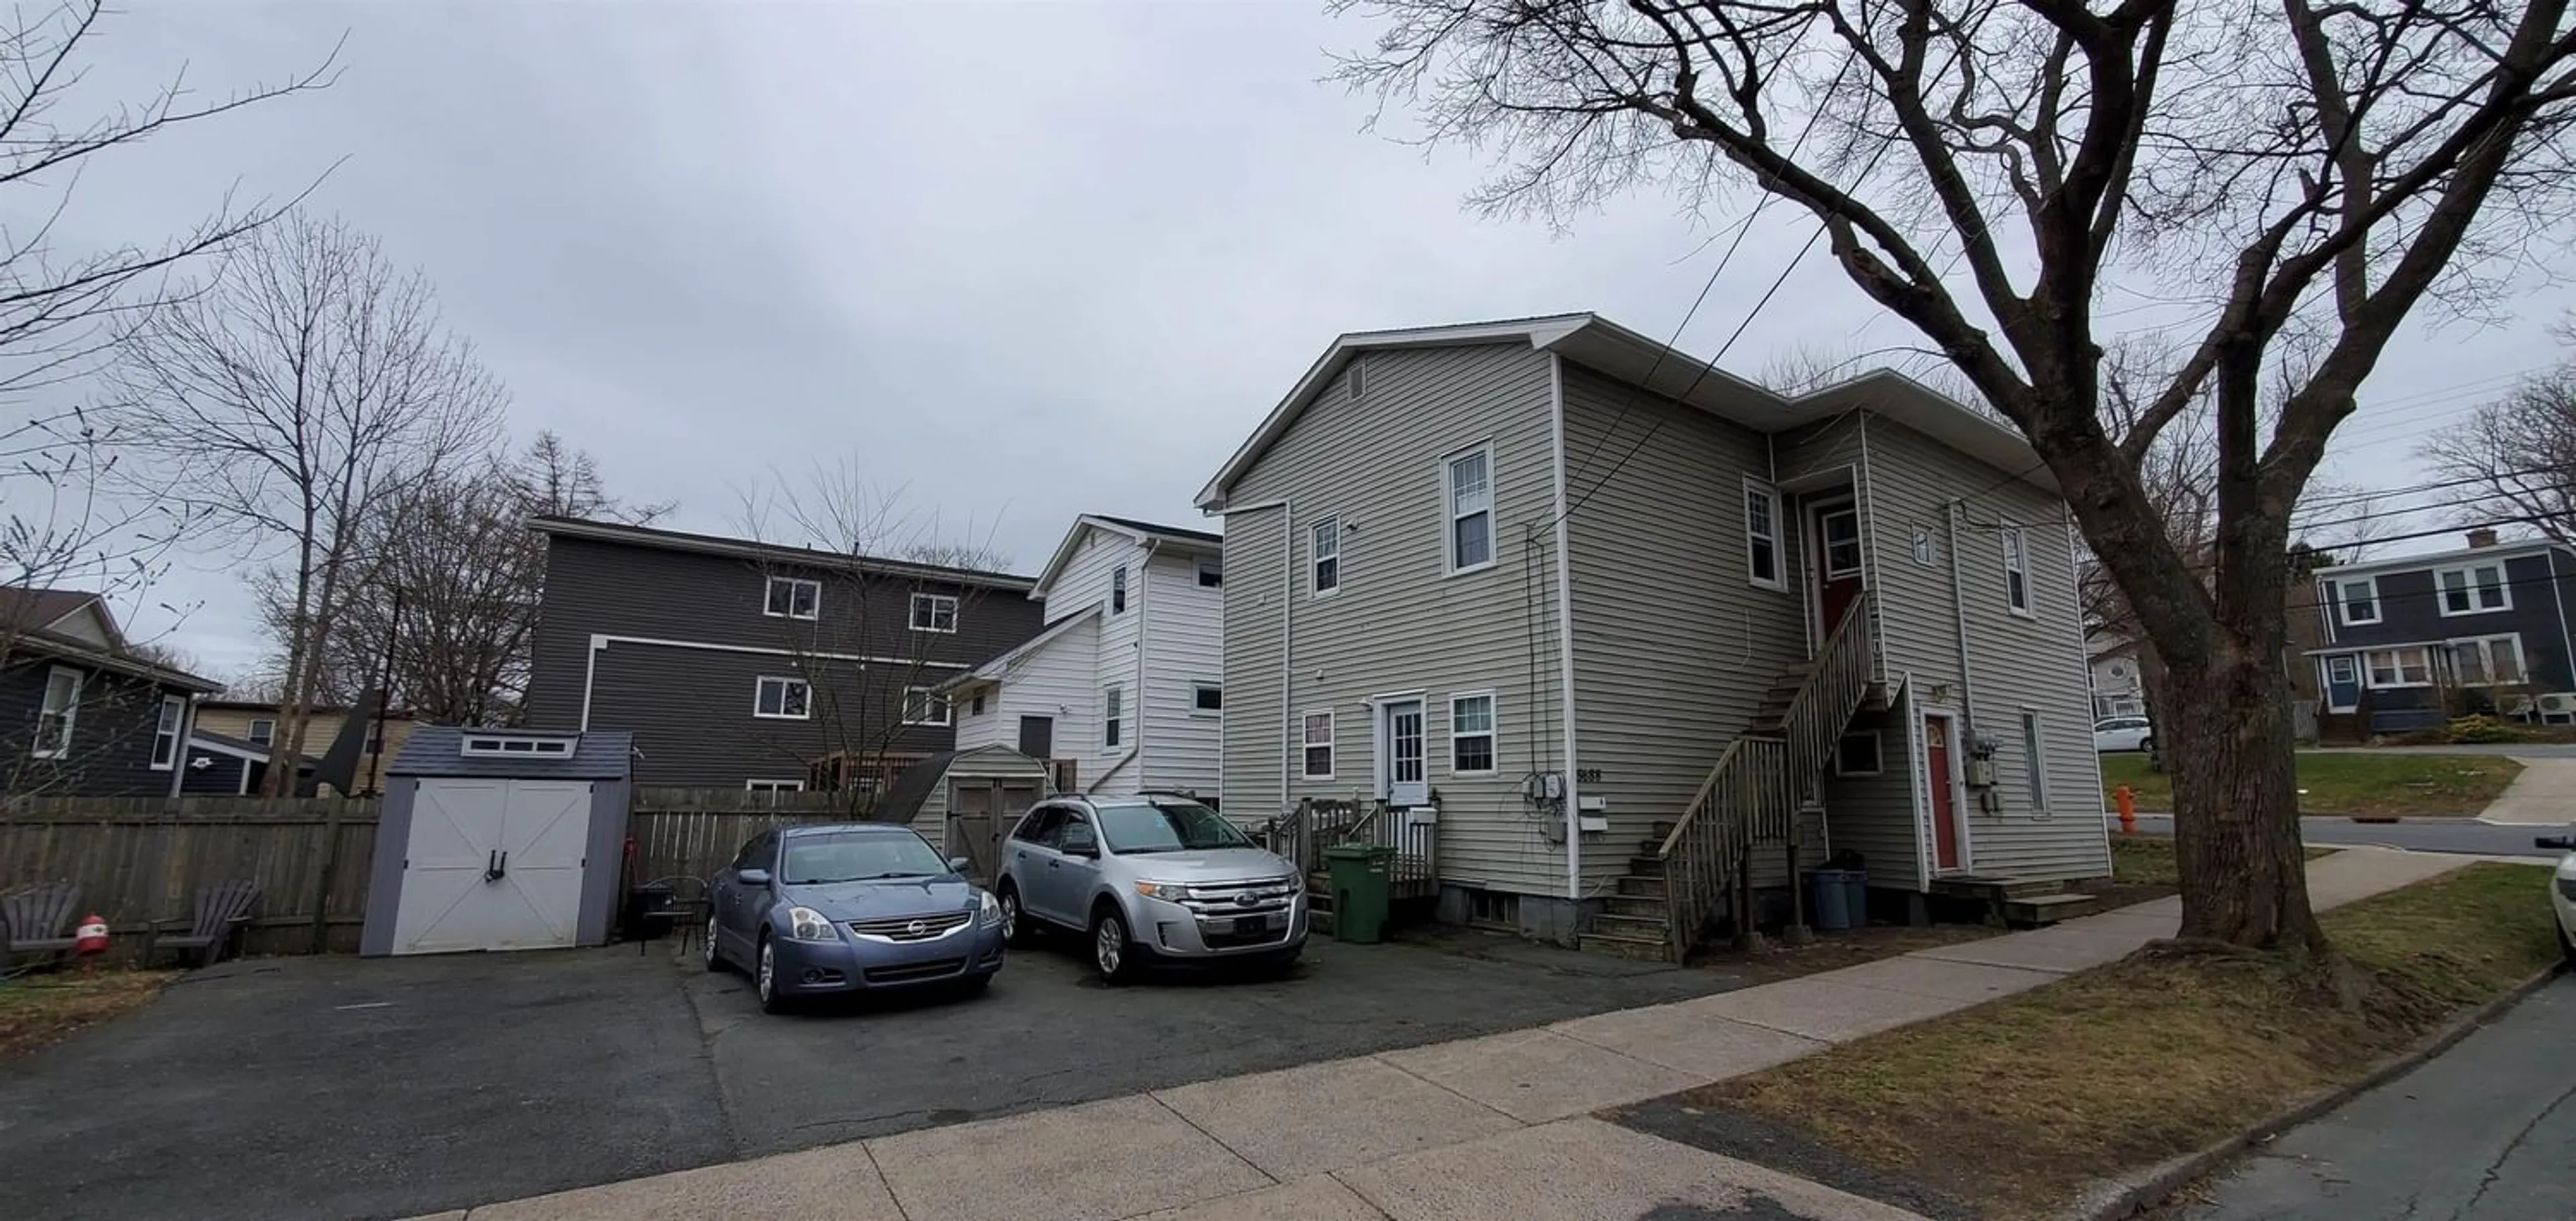 A pic from exterior of the house or condo for 5690, 5688A & B Cabot St, Halifax Nova Scotia B3K 2J8